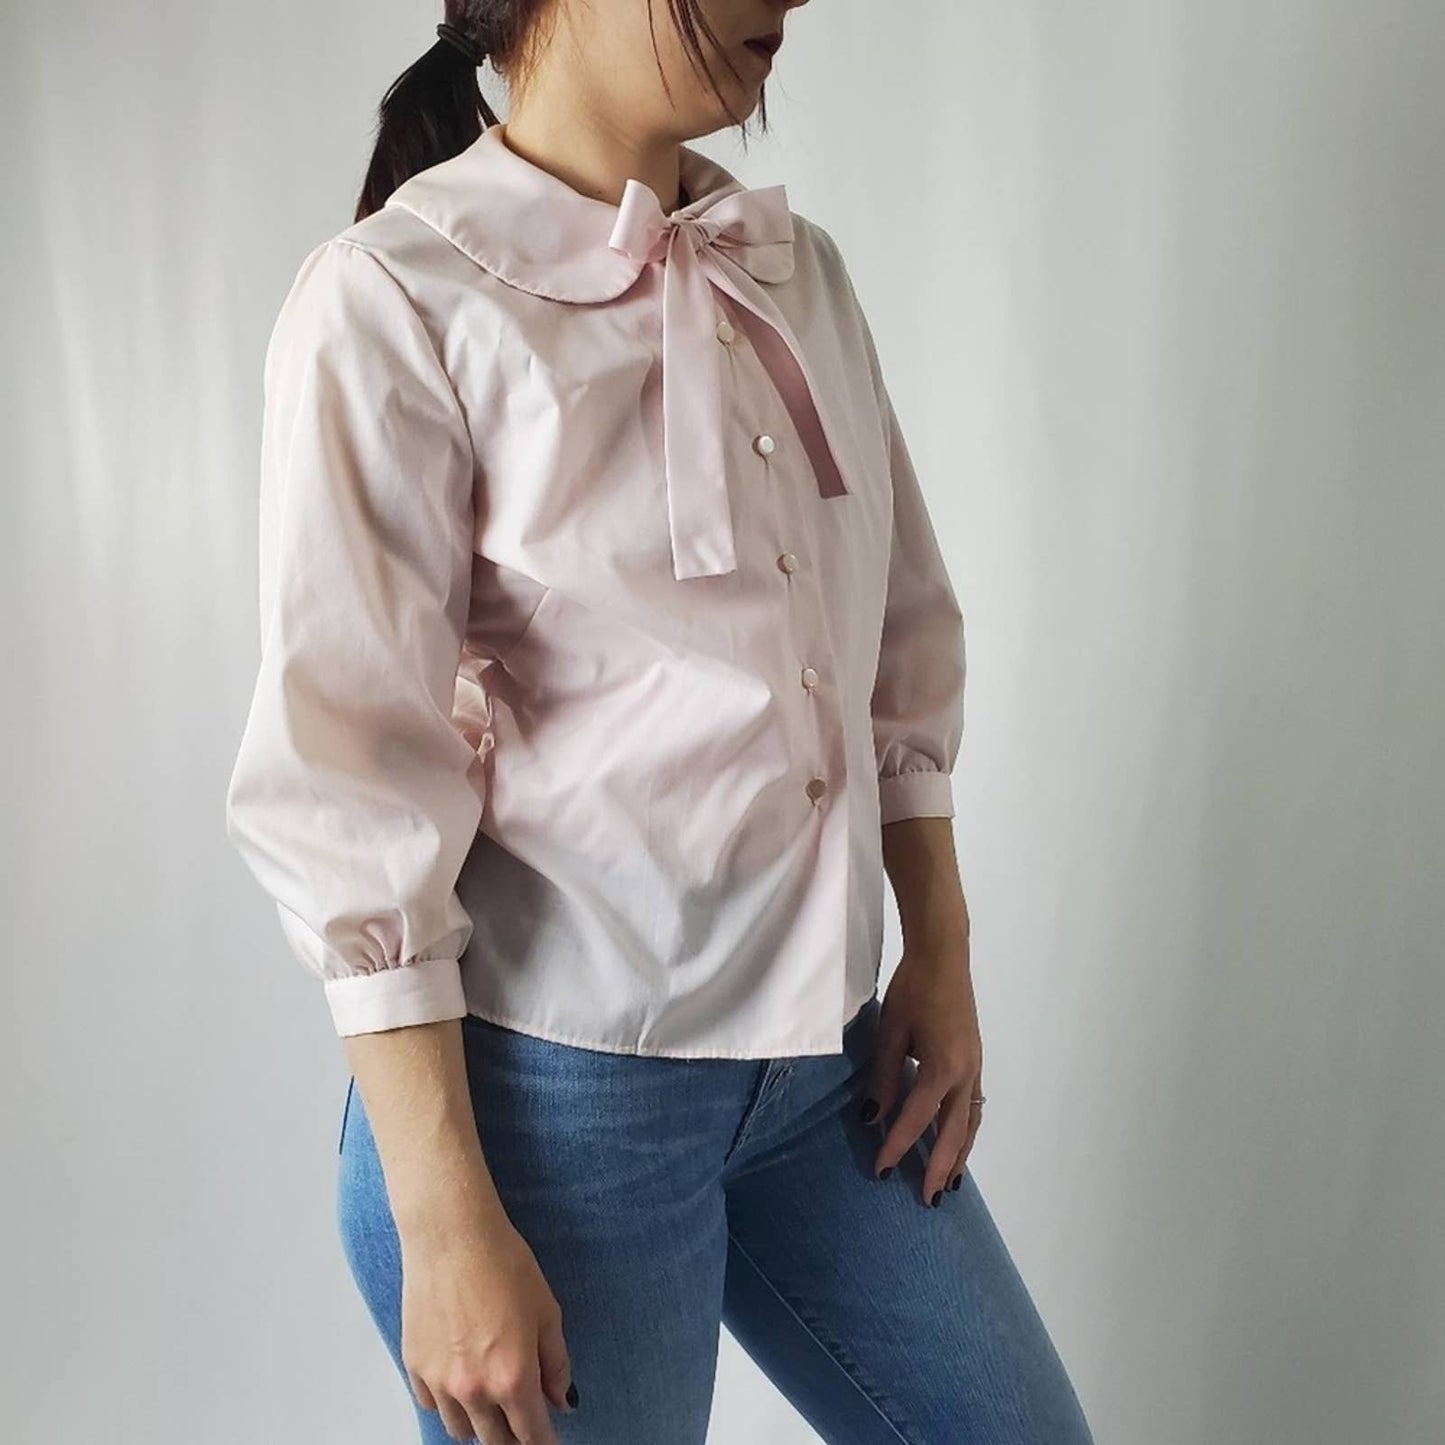 RARE 60s Peter Pan Cropped Sleeve Button Up Blouse - S